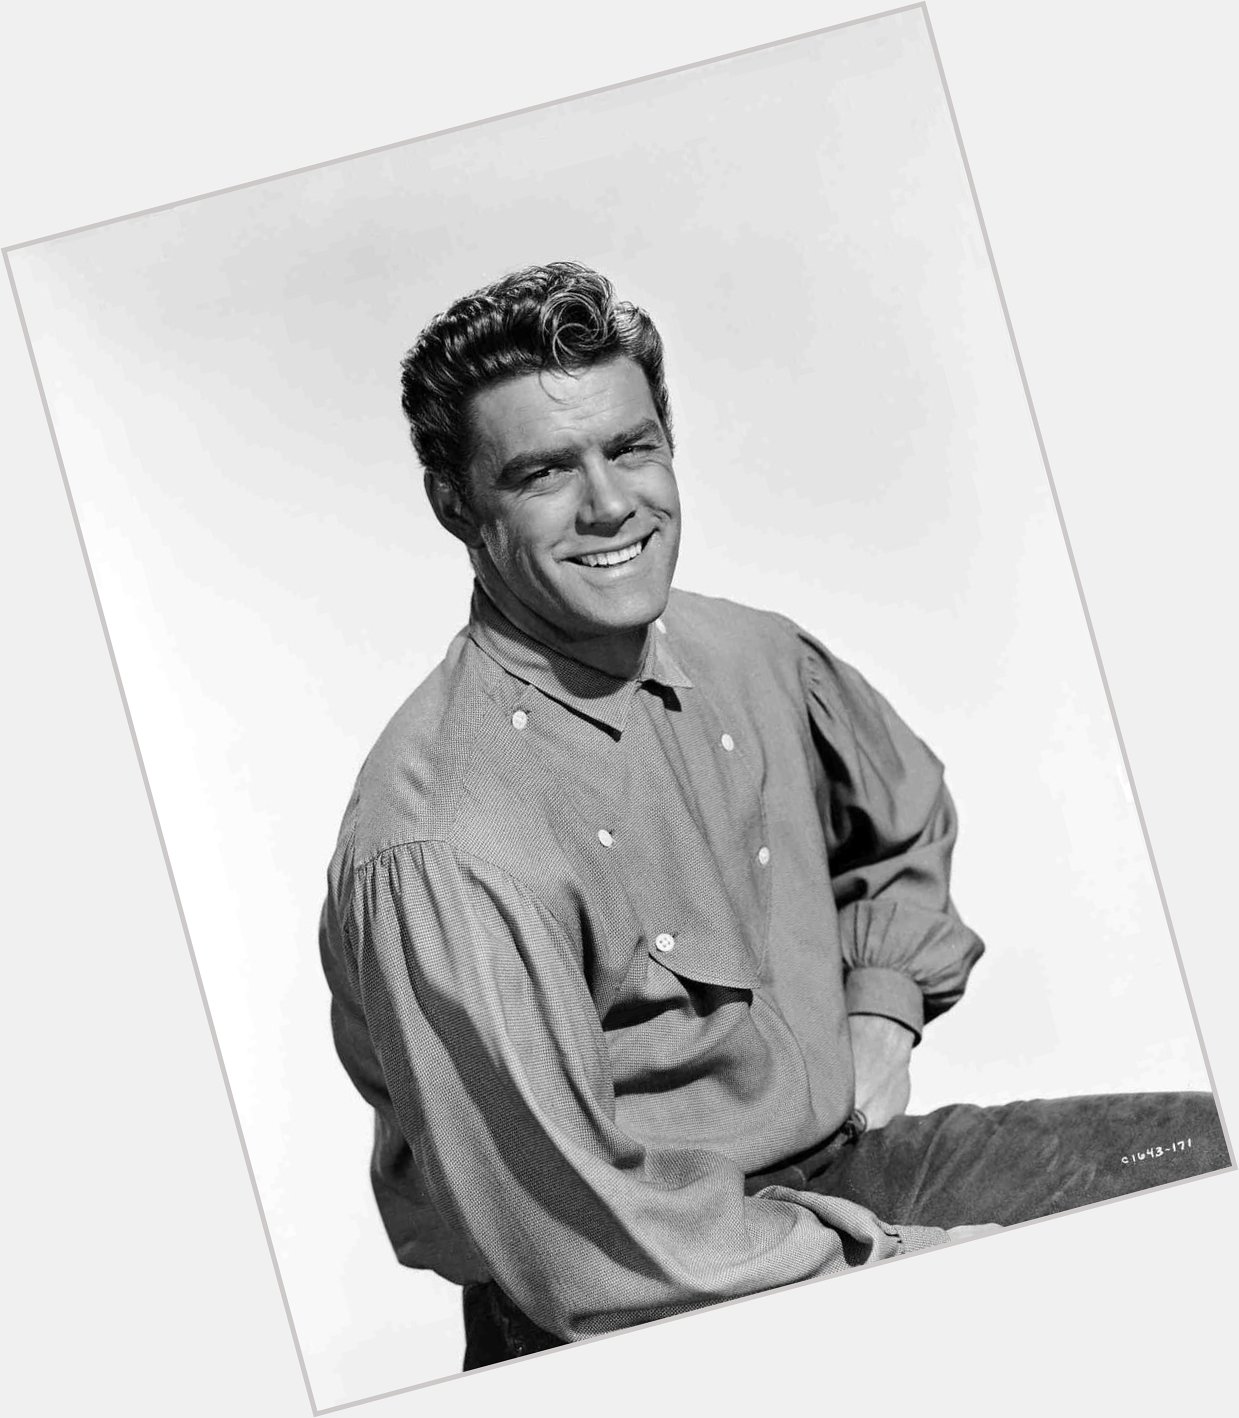 Happy Birthday to Jeff Richards! I enjoyed him in Seven Brides for Seven Brothers. 